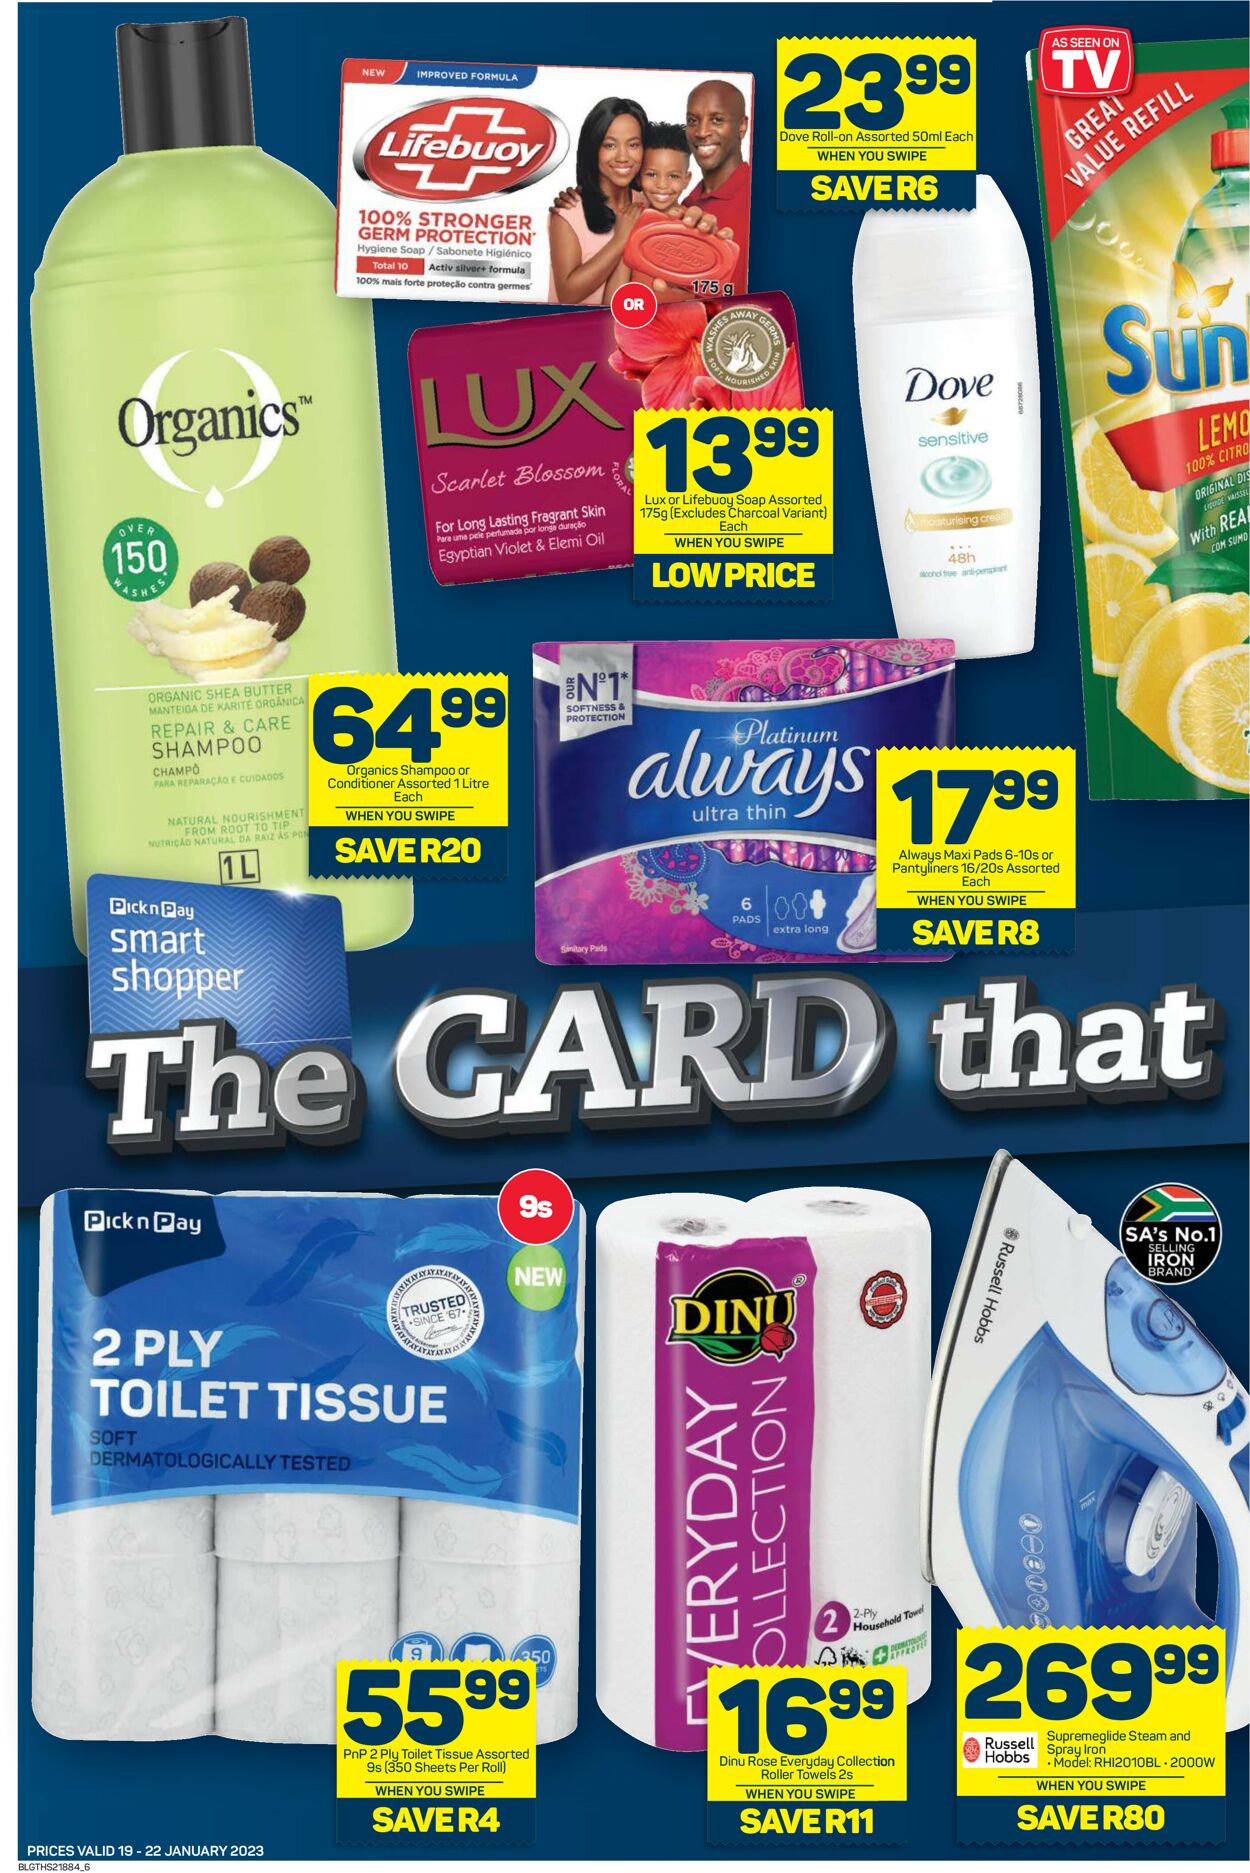 Pick n Pay Catalogue - 2023/01/19-2023/01/22 (Page 6)